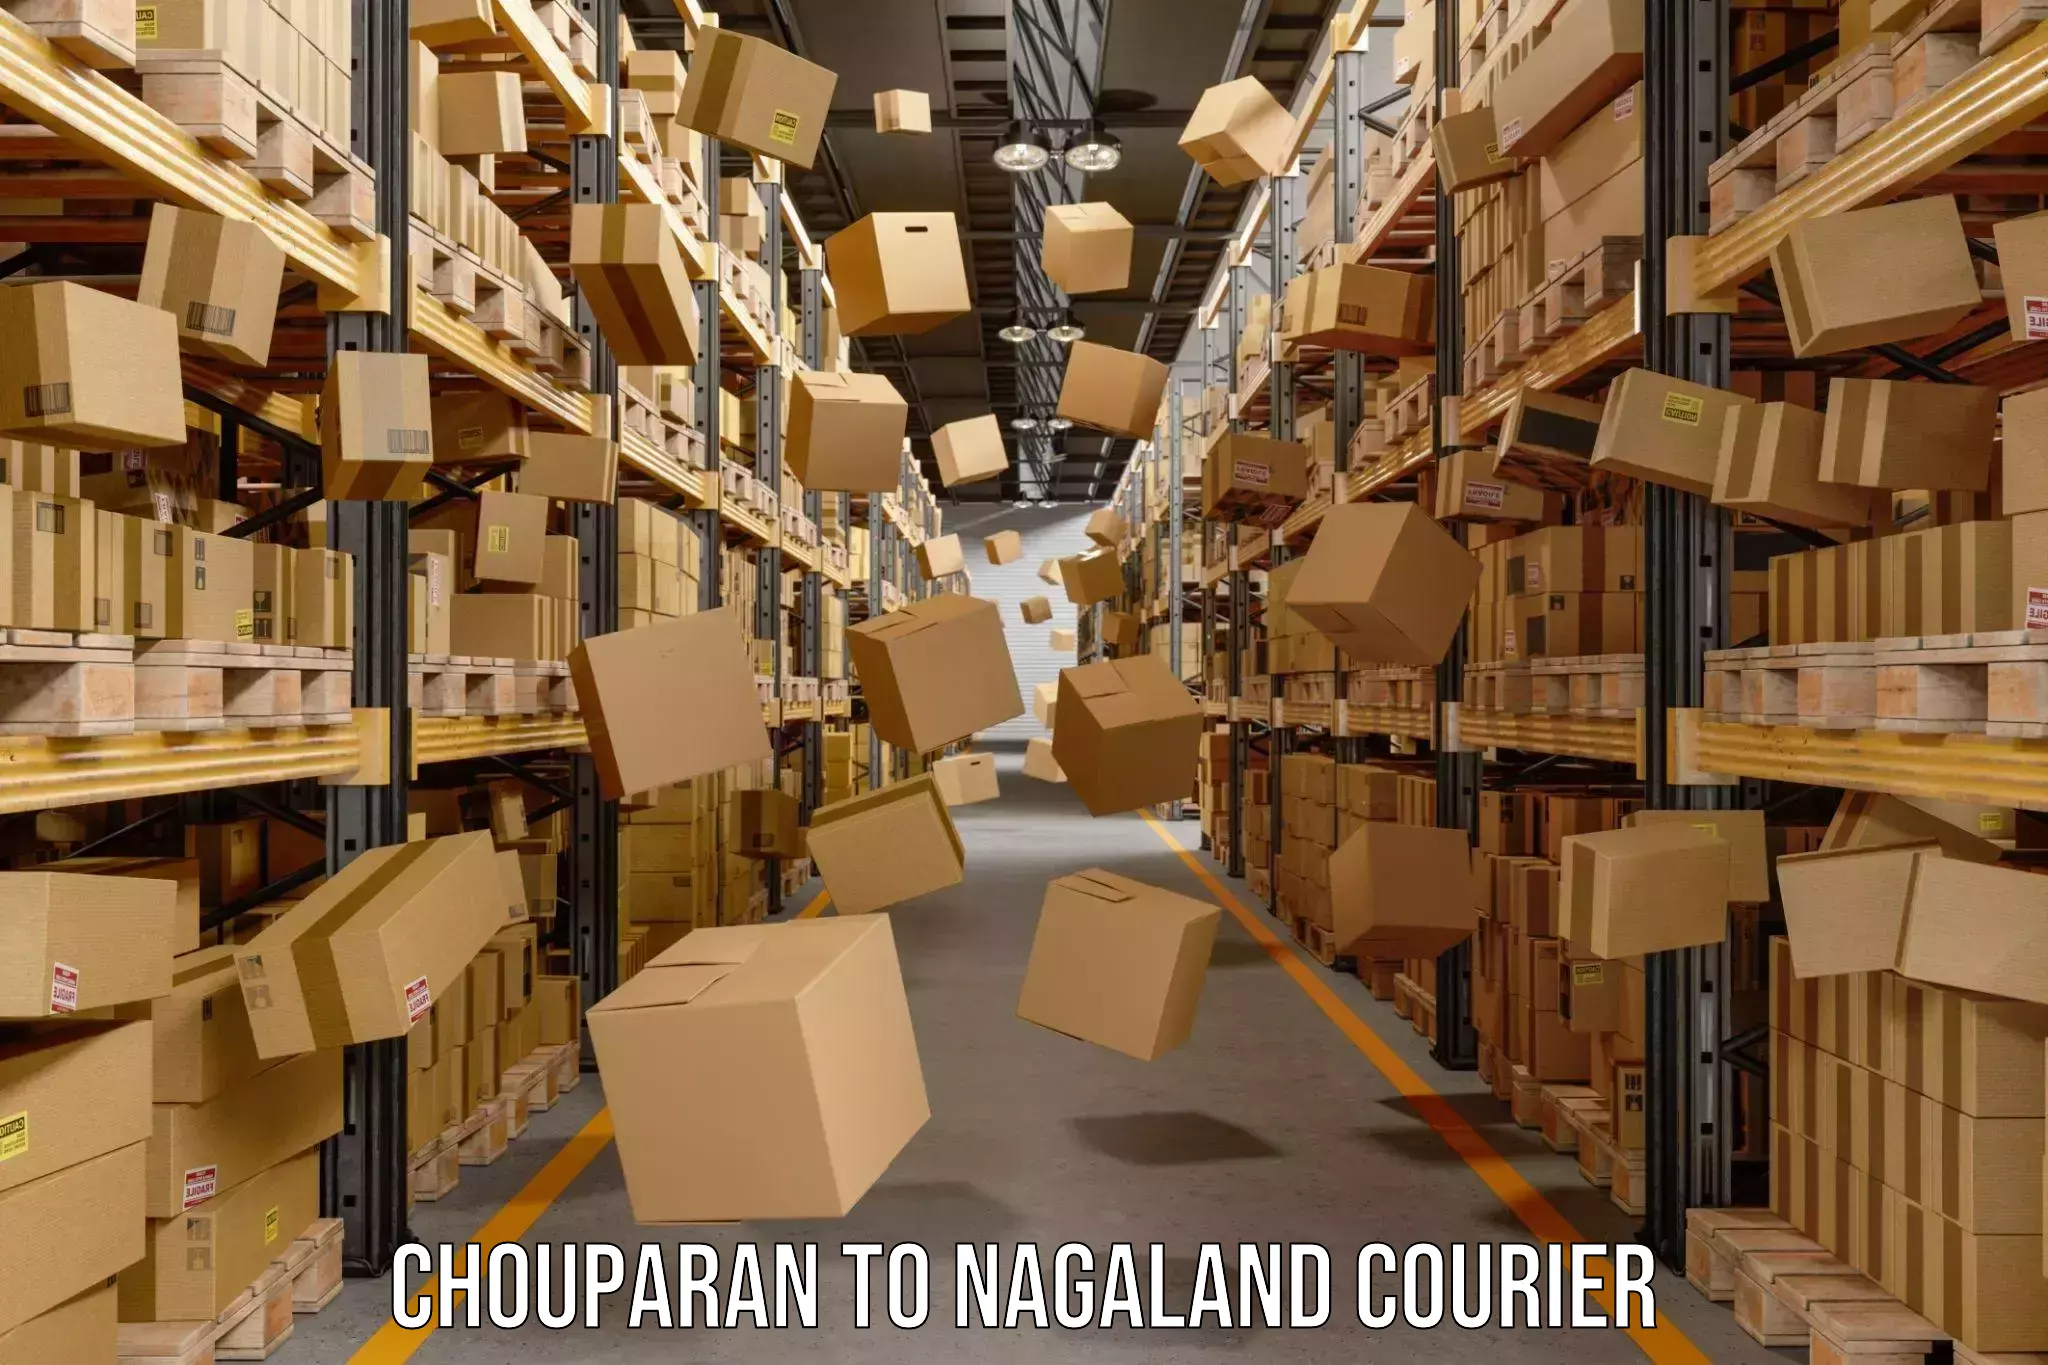 Weekend courier service in Chouparan to Dimapur